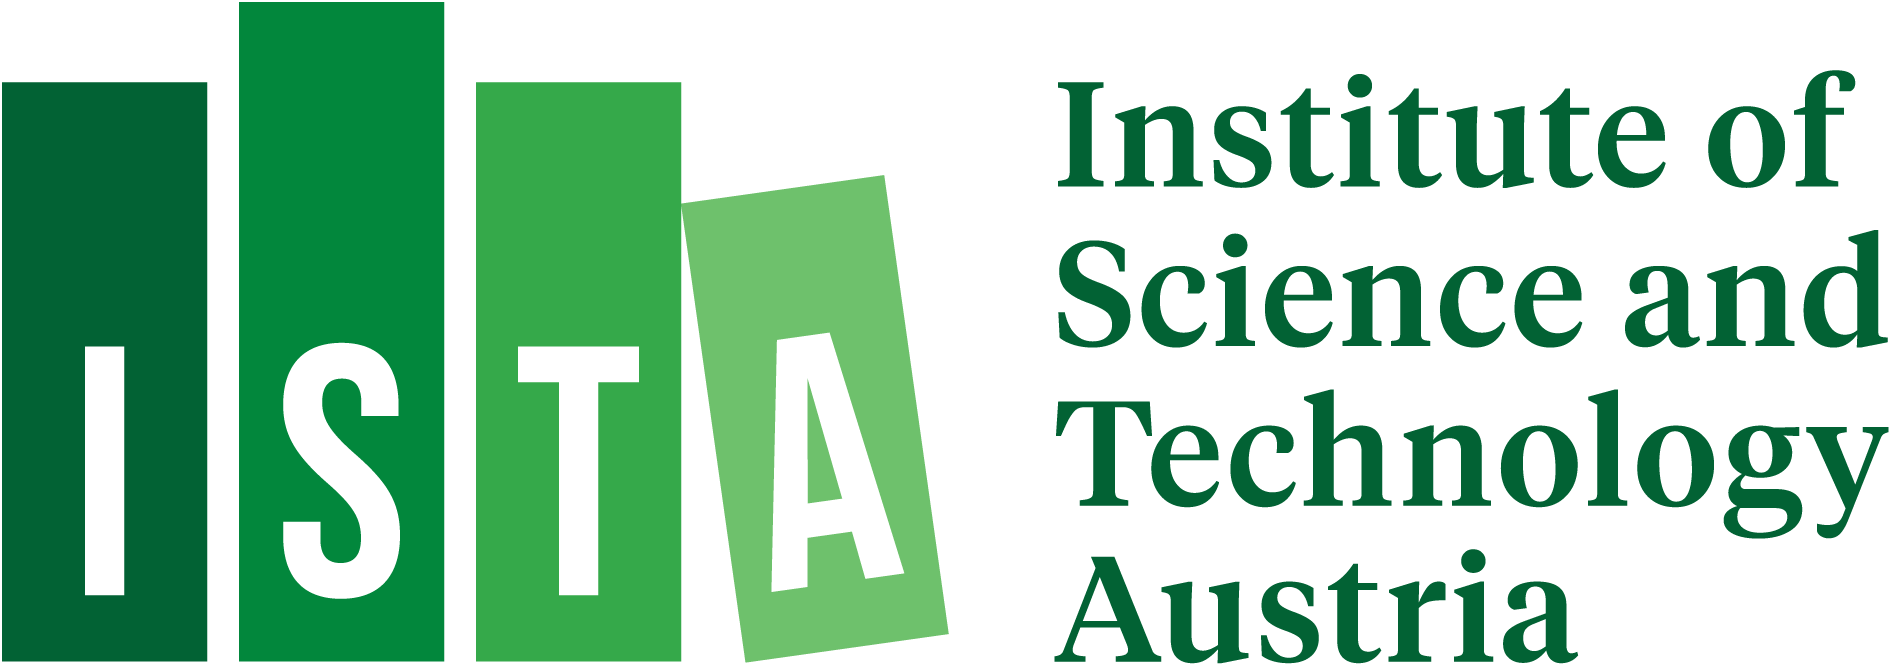 Institute of Science and Technology Austria(ISTA)